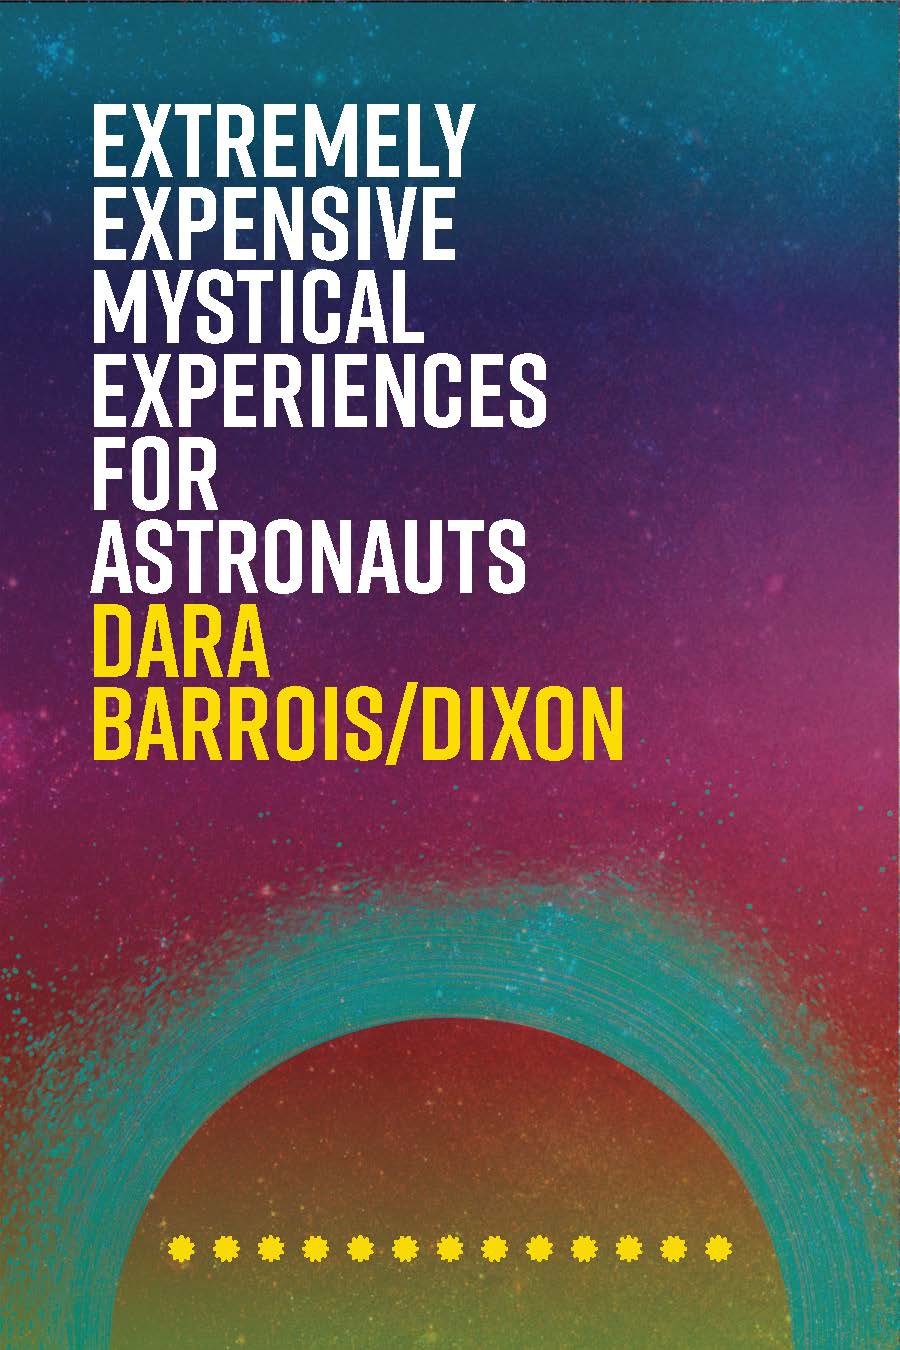 Vibrant book cover featuring a mind-bending psychedelic pattern, belonging to the book named "Highly Priced Metaphysical Experiences for Astronauts" by Dara Barrois/Dixon.